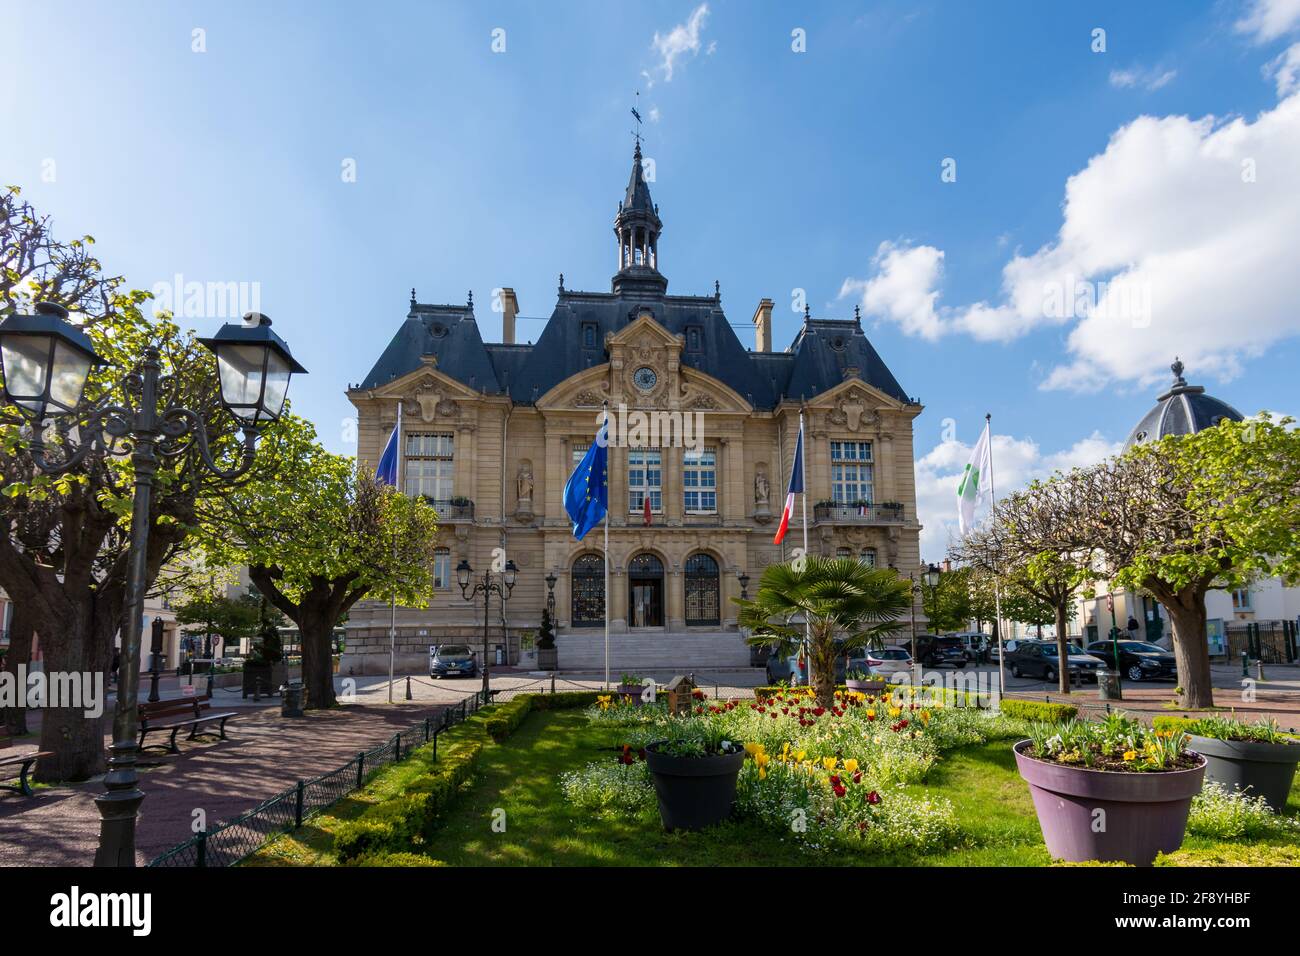 Exterior view of the city hall of Suresnes, a town in the Hauts-de-Seine department, located west of Paris, France Stock Photo